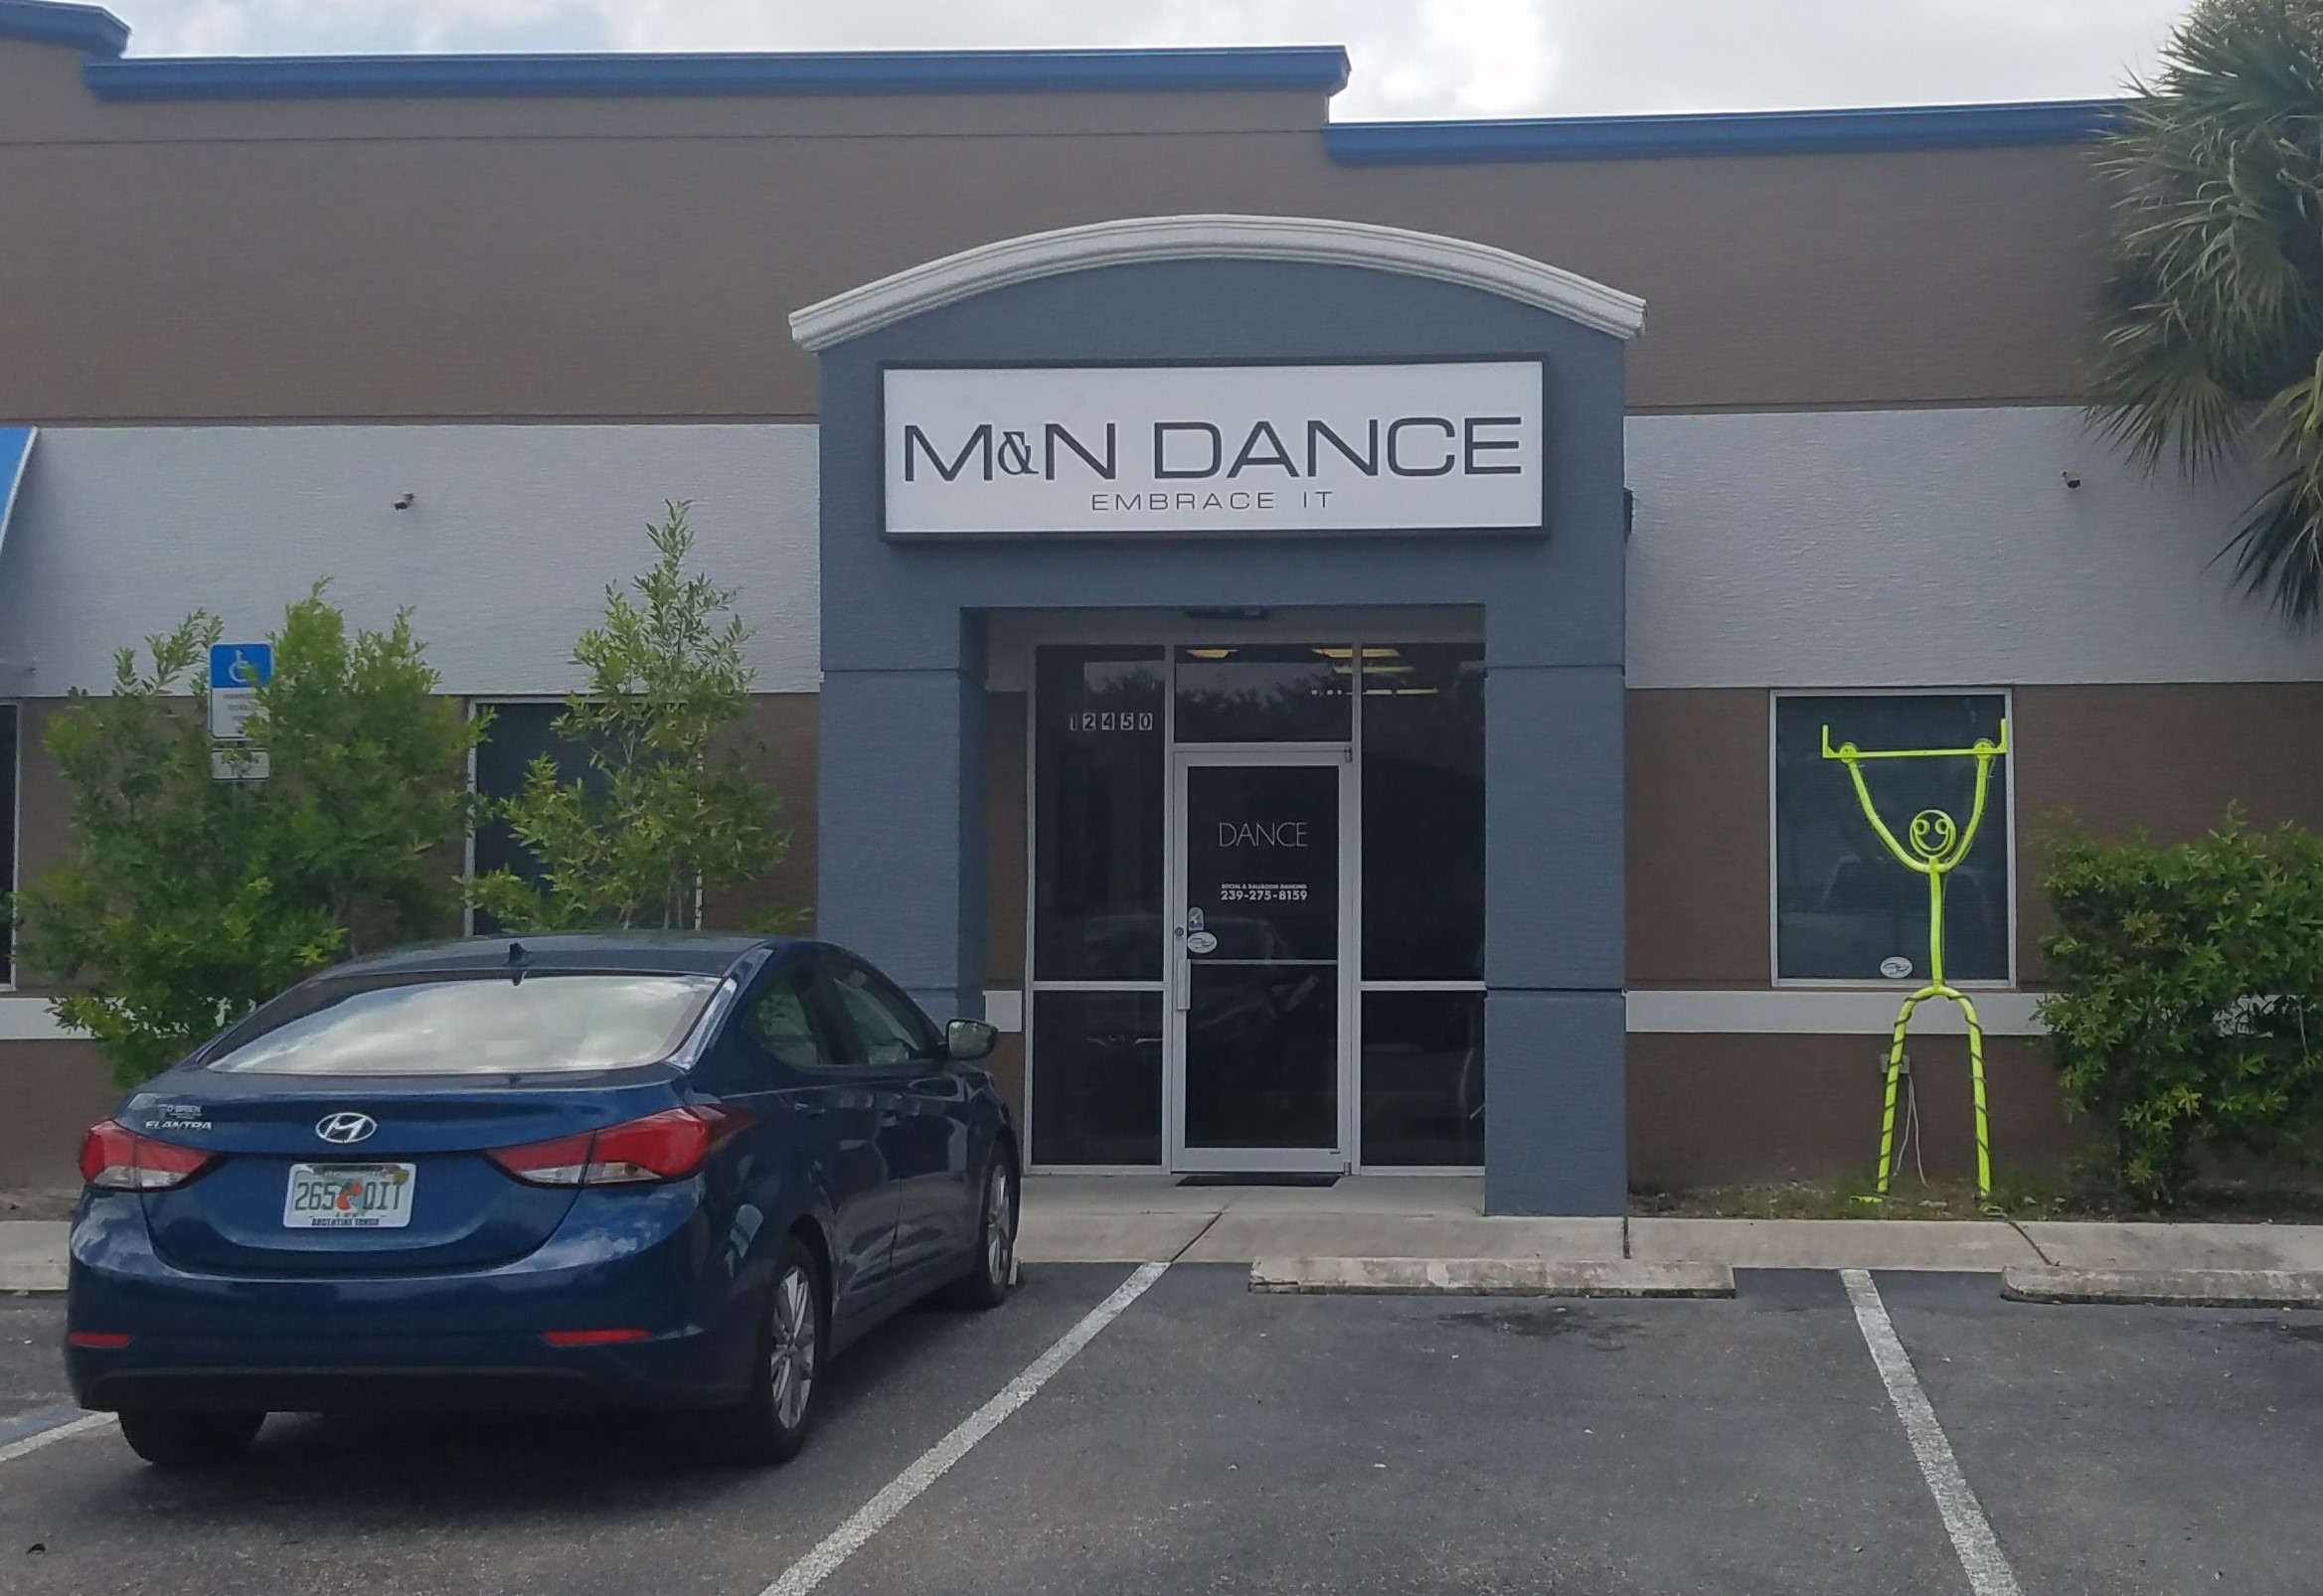 Front Unit of M&N Dance Studi, with the old Light Box Sign